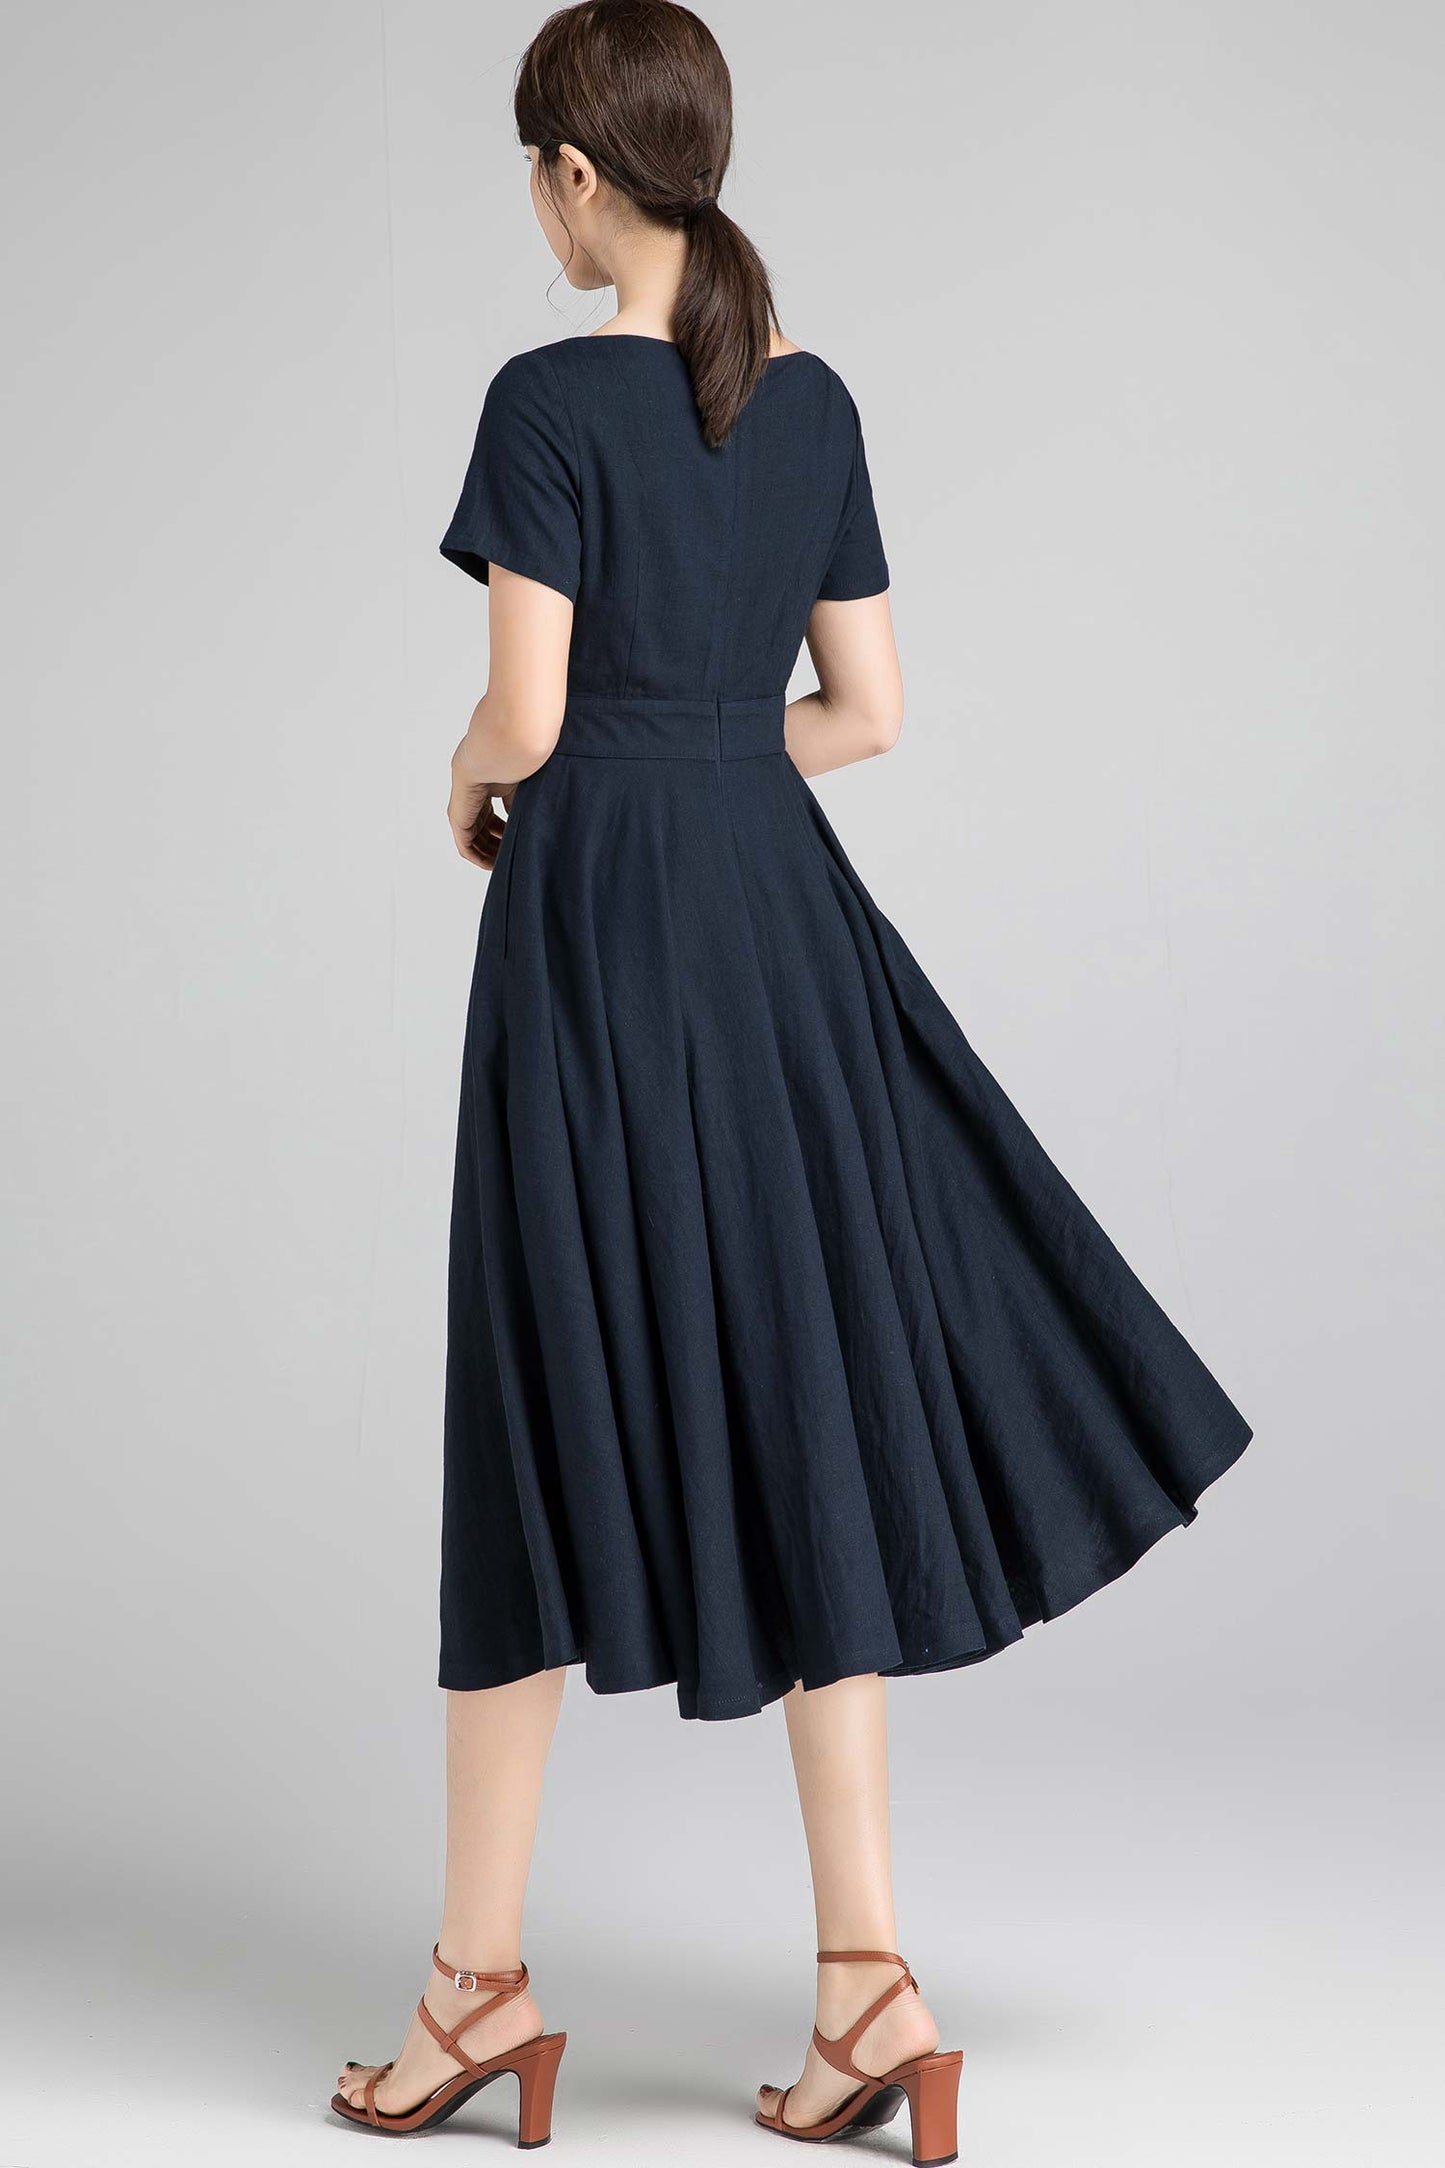 handmad 1950s swing fit and flare dress in navy blue 2342#